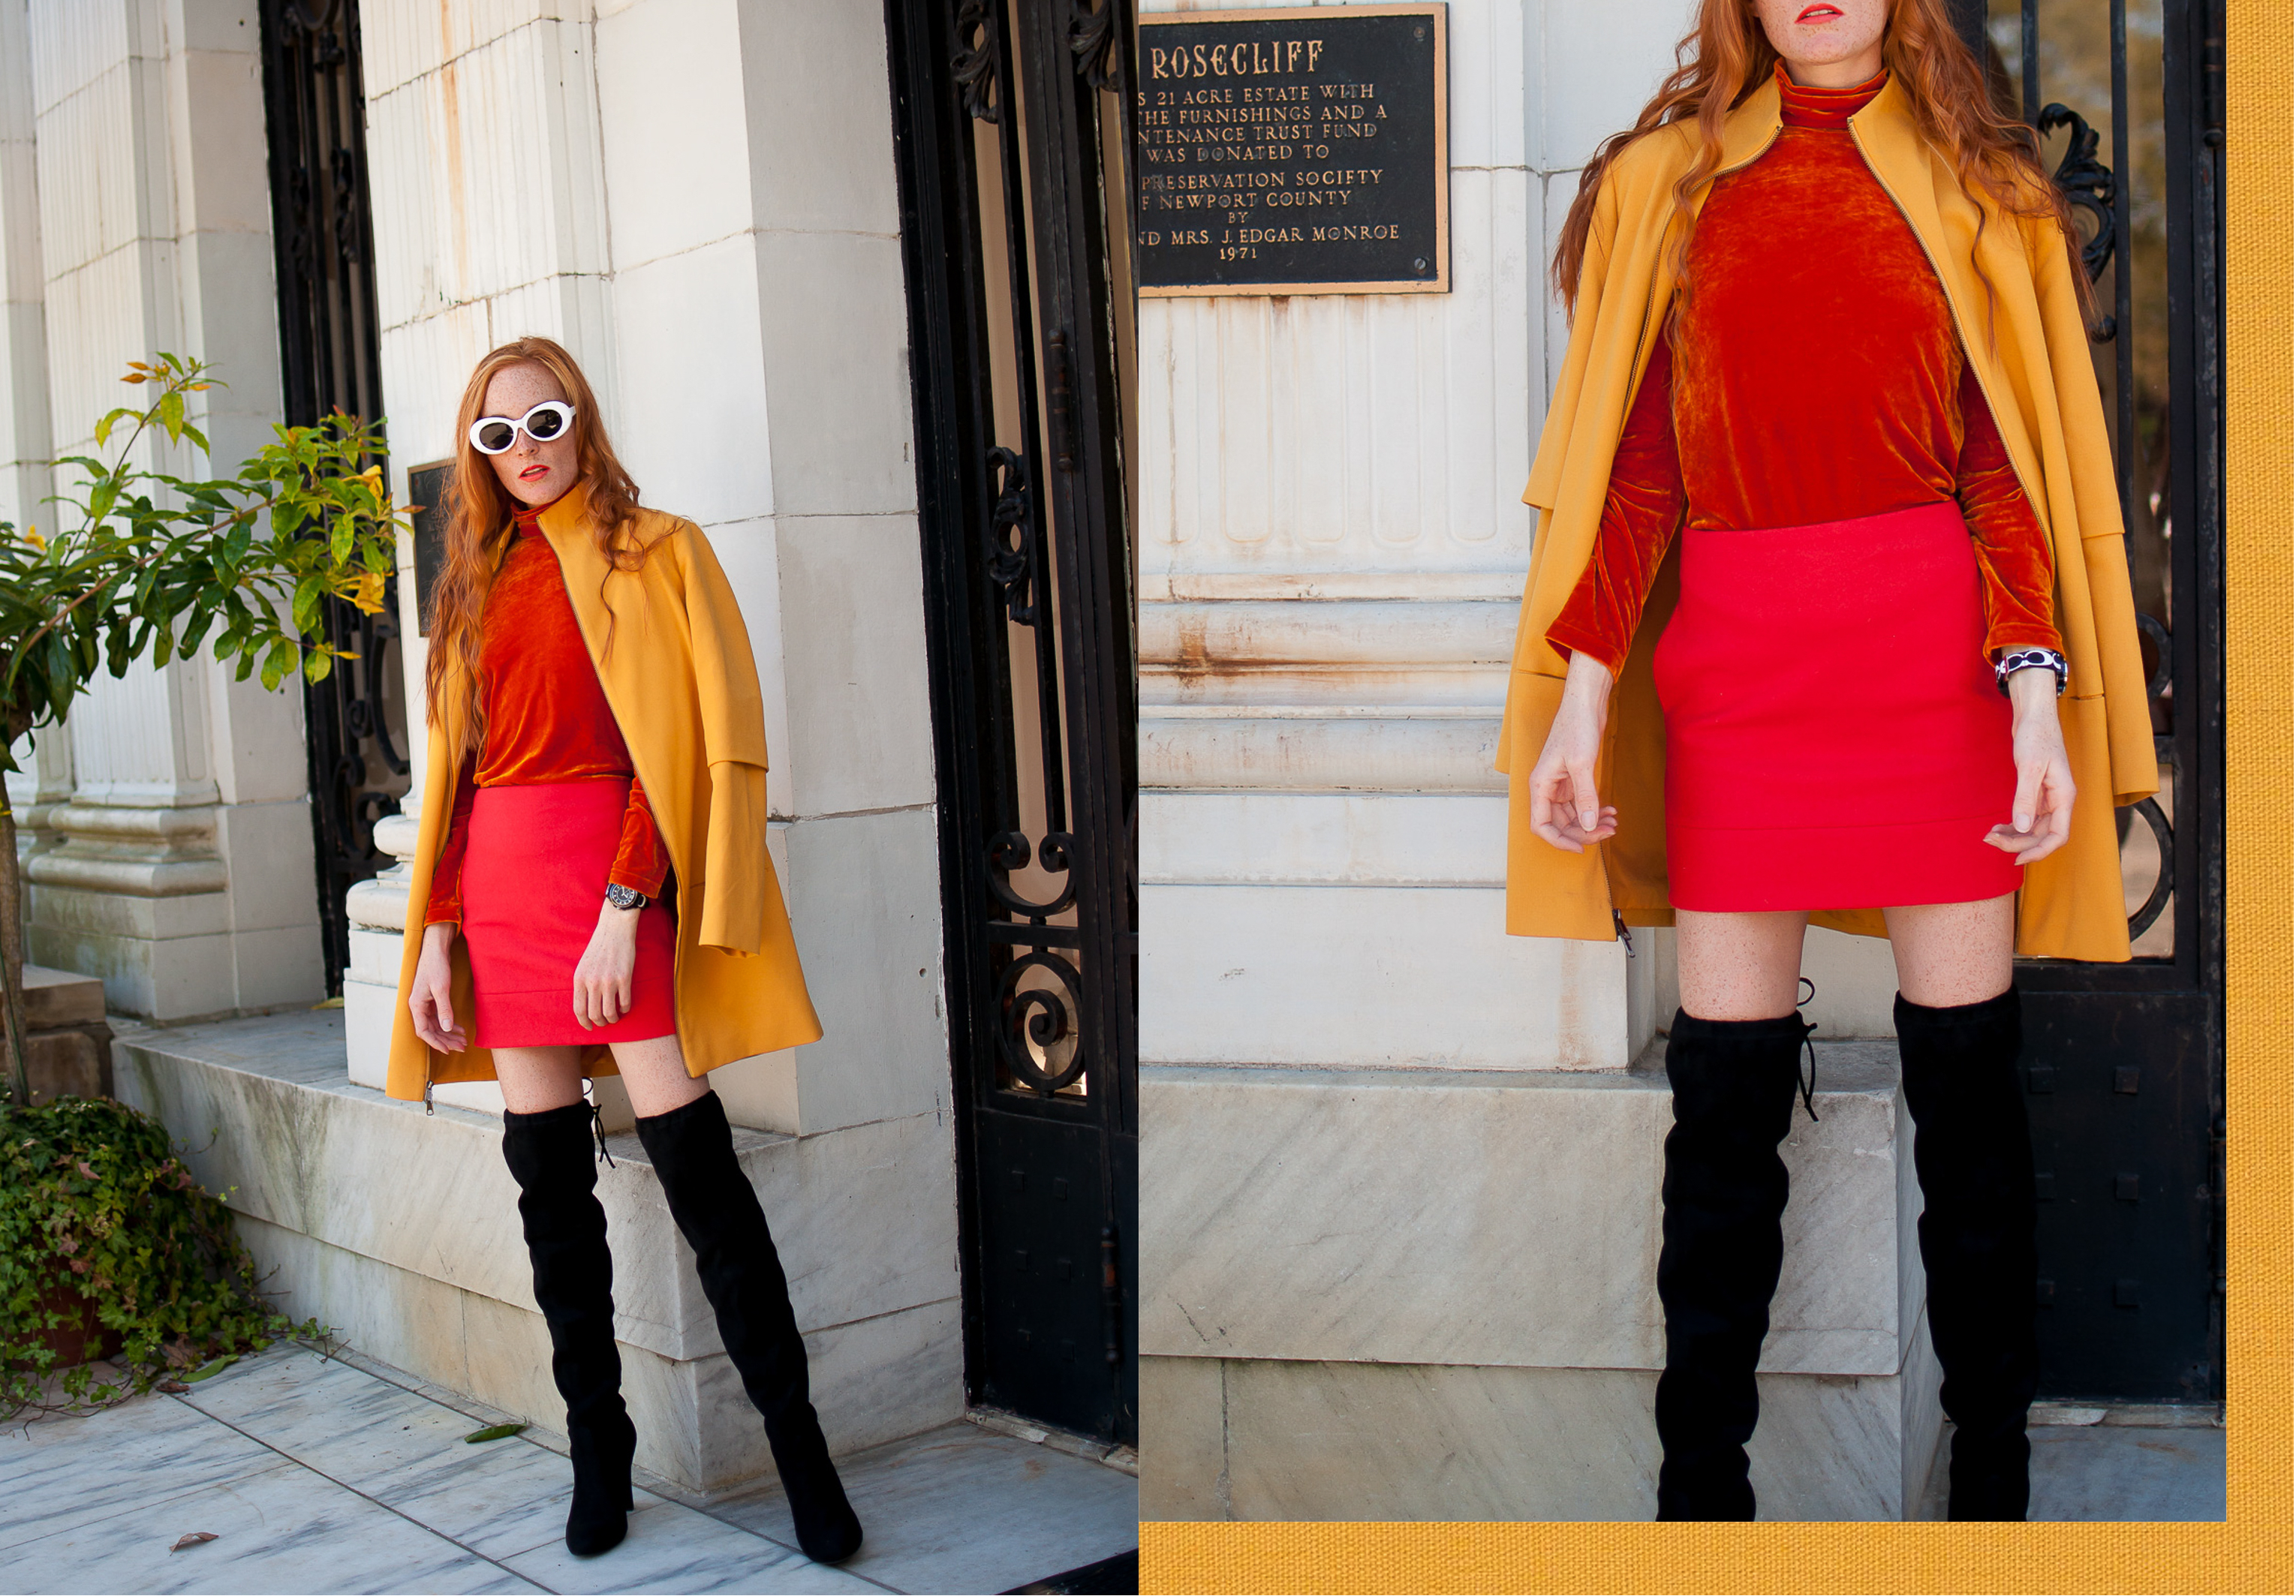 primary color block outfit with a mod style